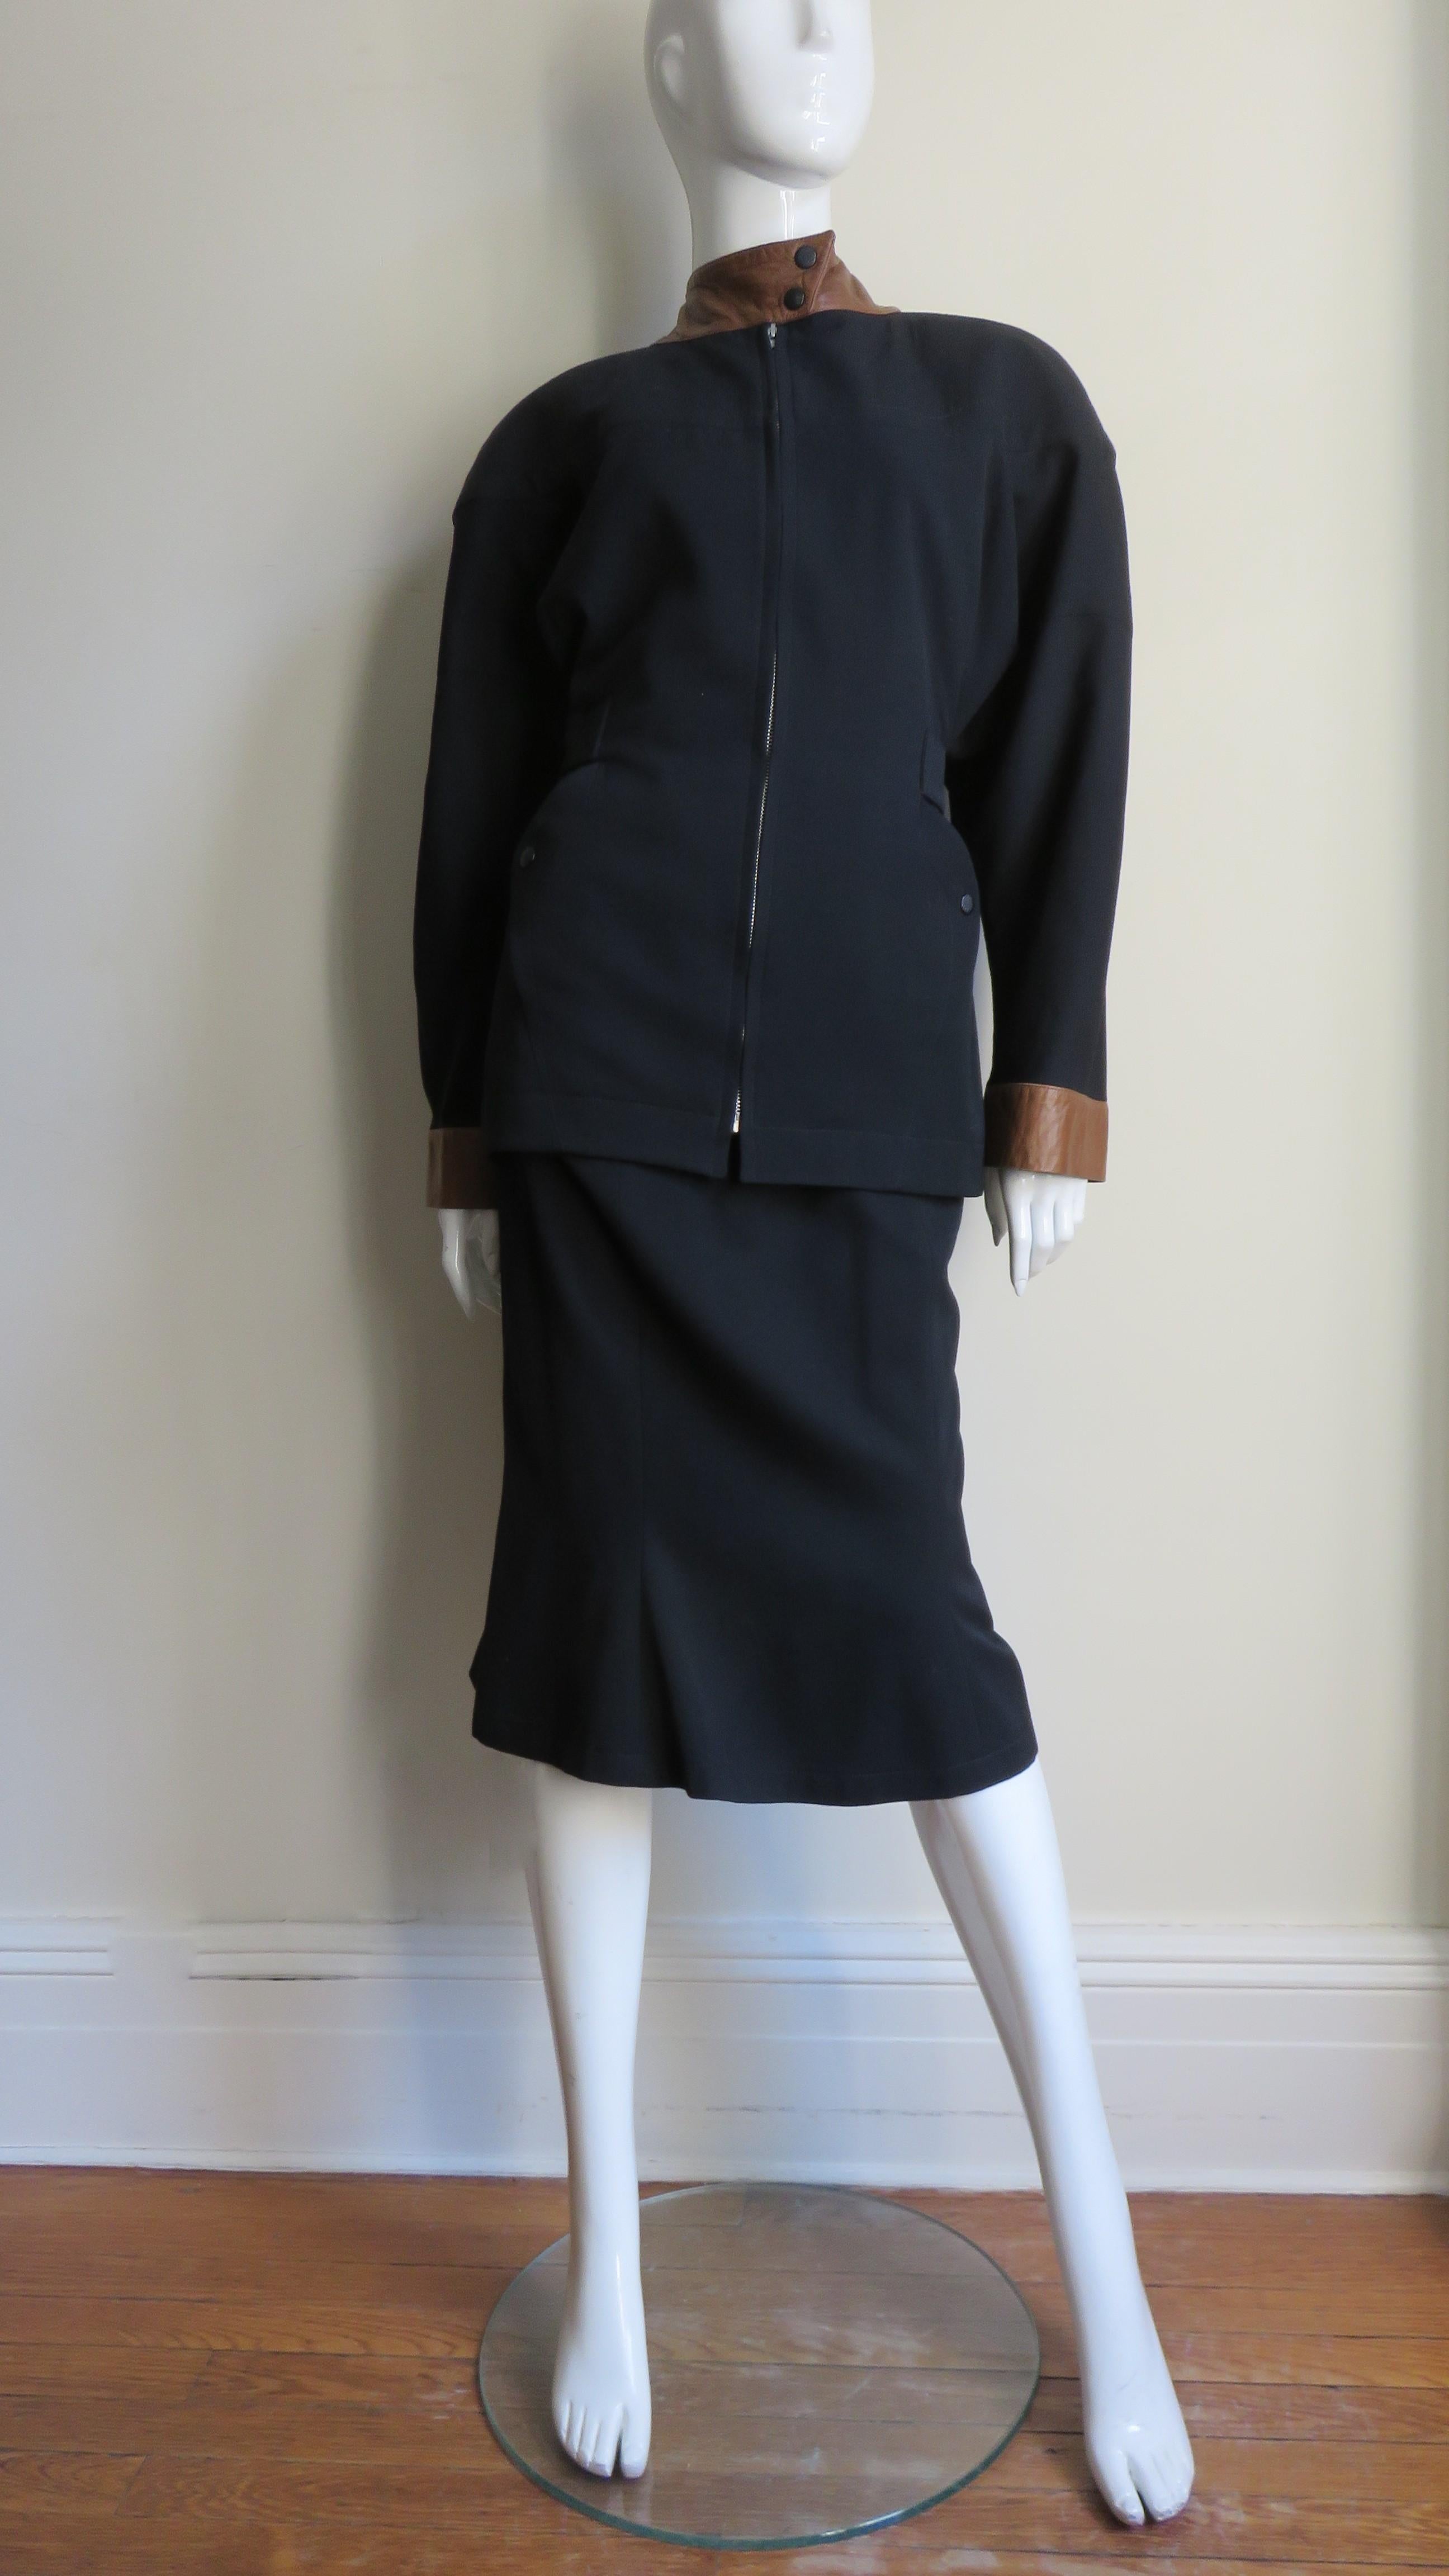 Thierry Mugler Skirt and Jacket Suit with Leather Trim 1